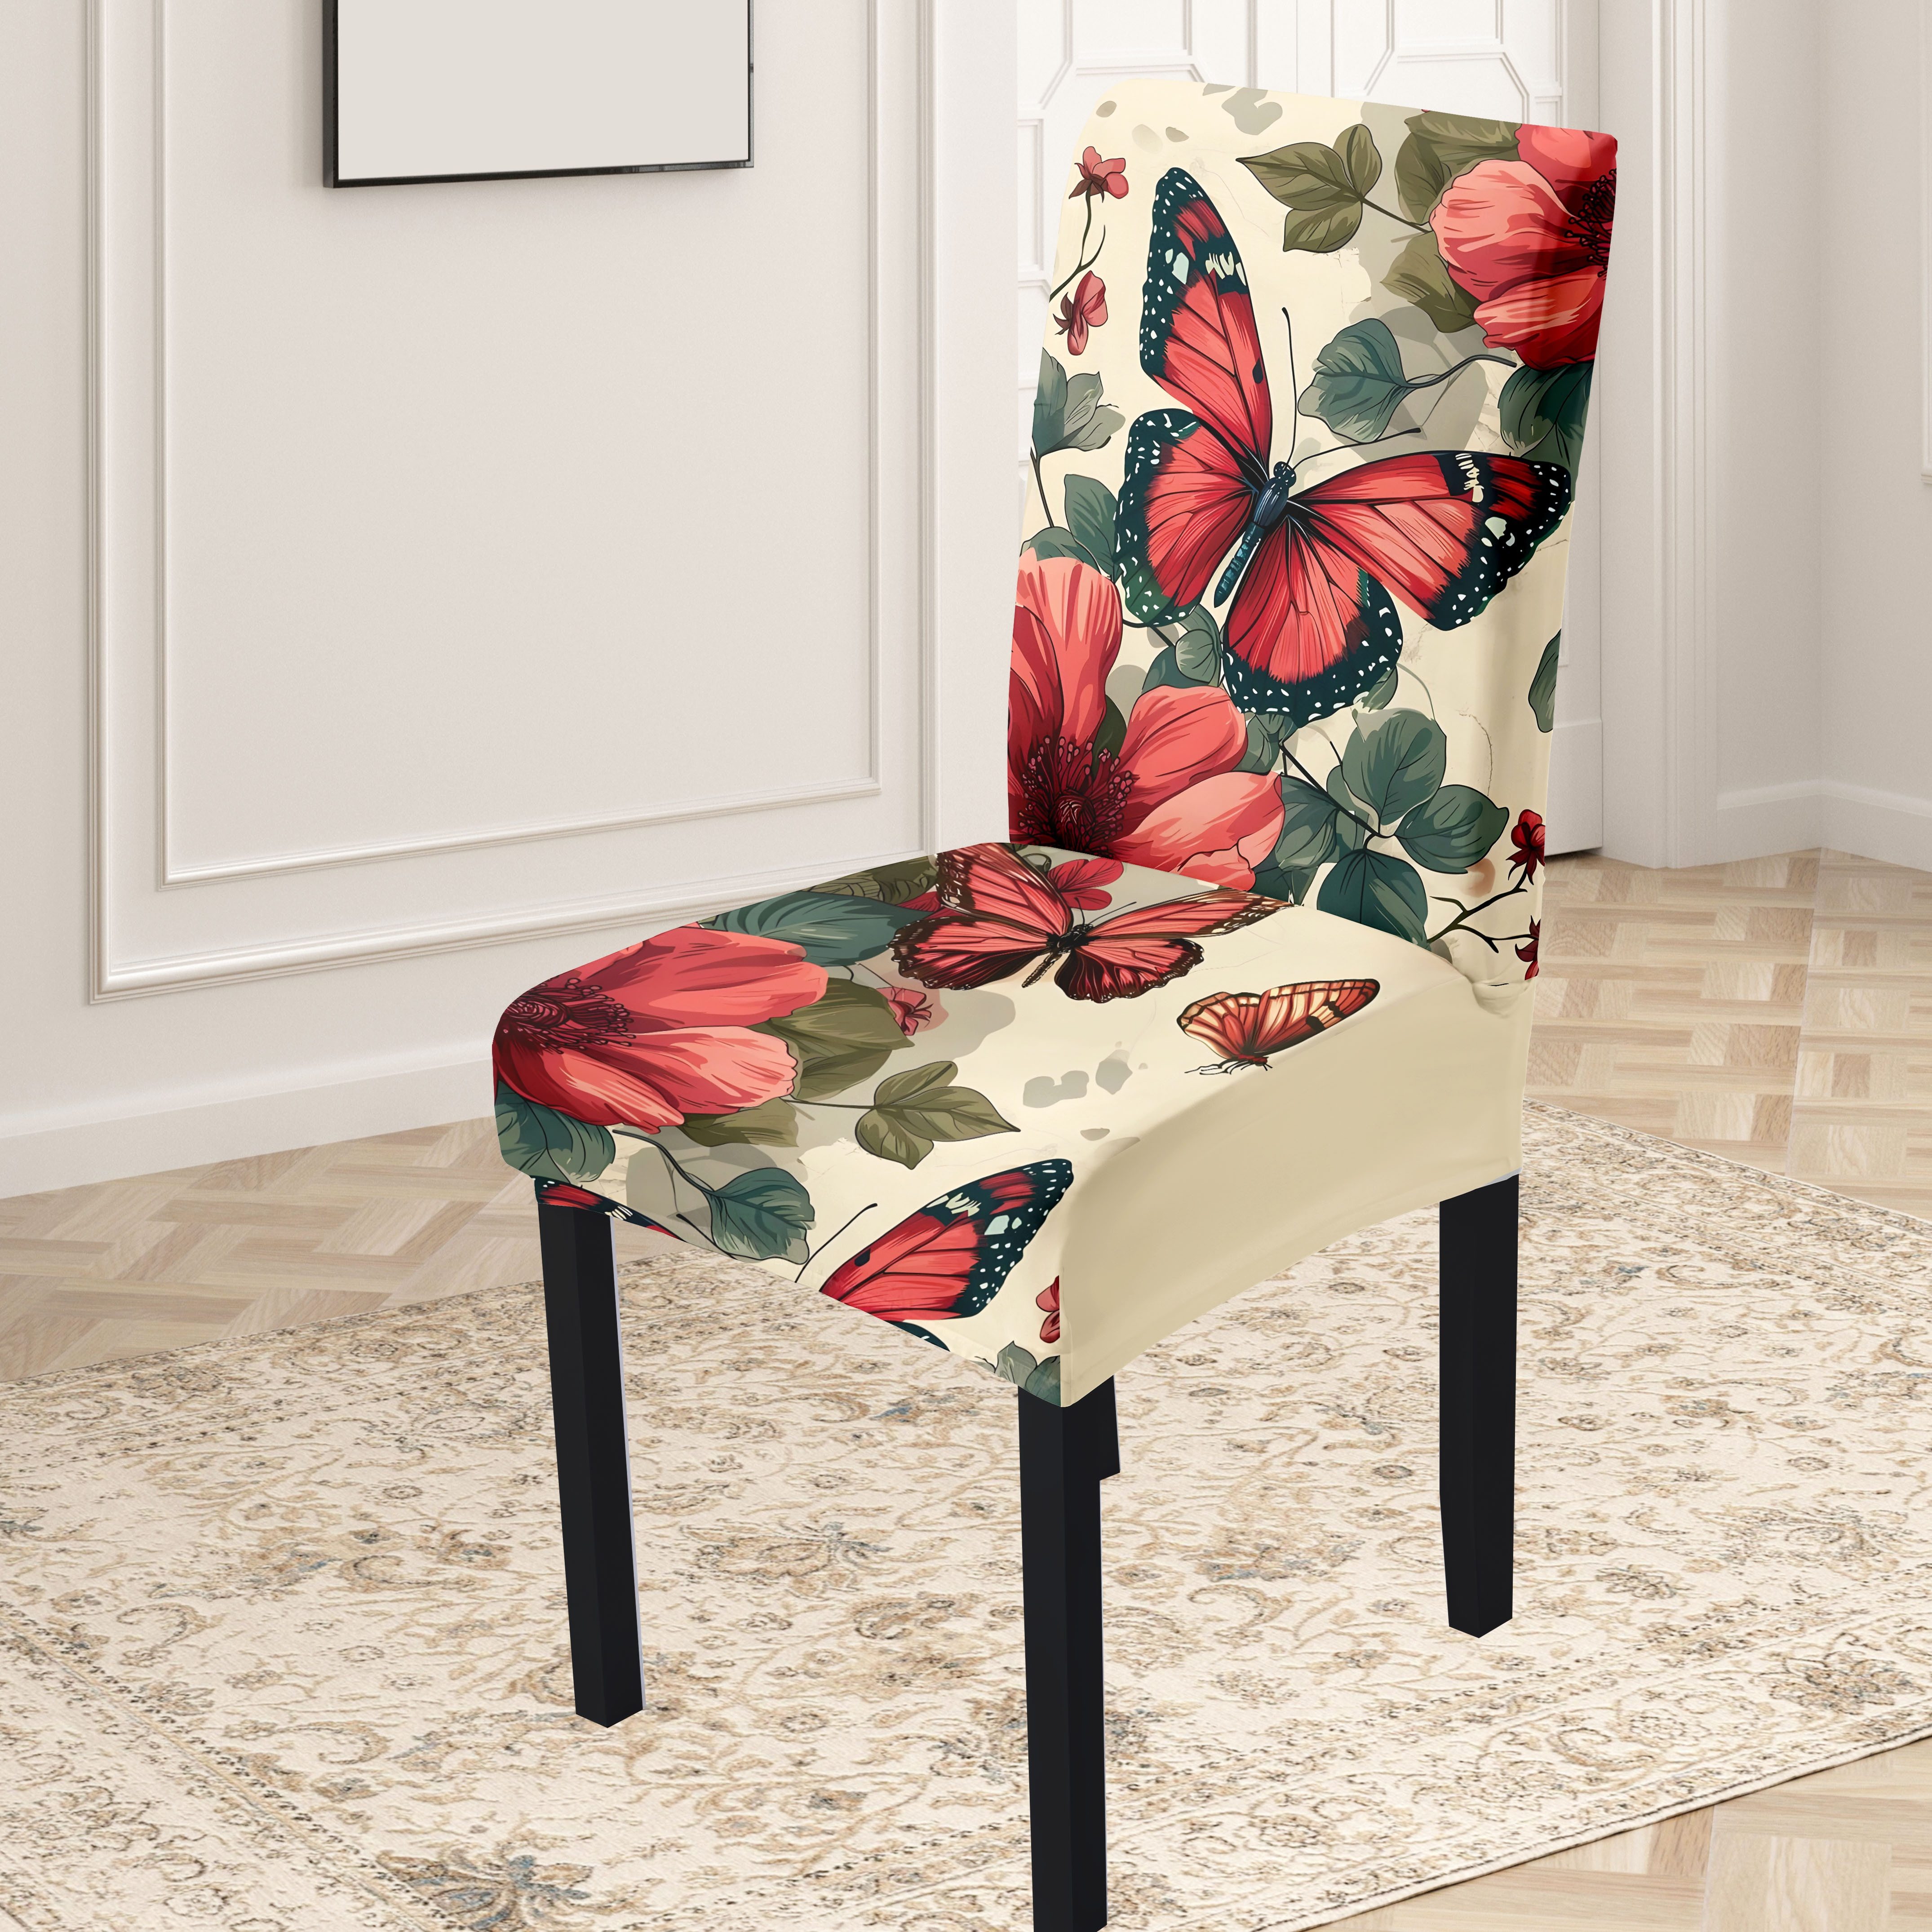 

4/6pcs Jit-enabled Butterfly & Floral Print Chair Covers - High Elasticity, Milk Silk Fabric, Suitable For Home, Hotel, Garden Settings